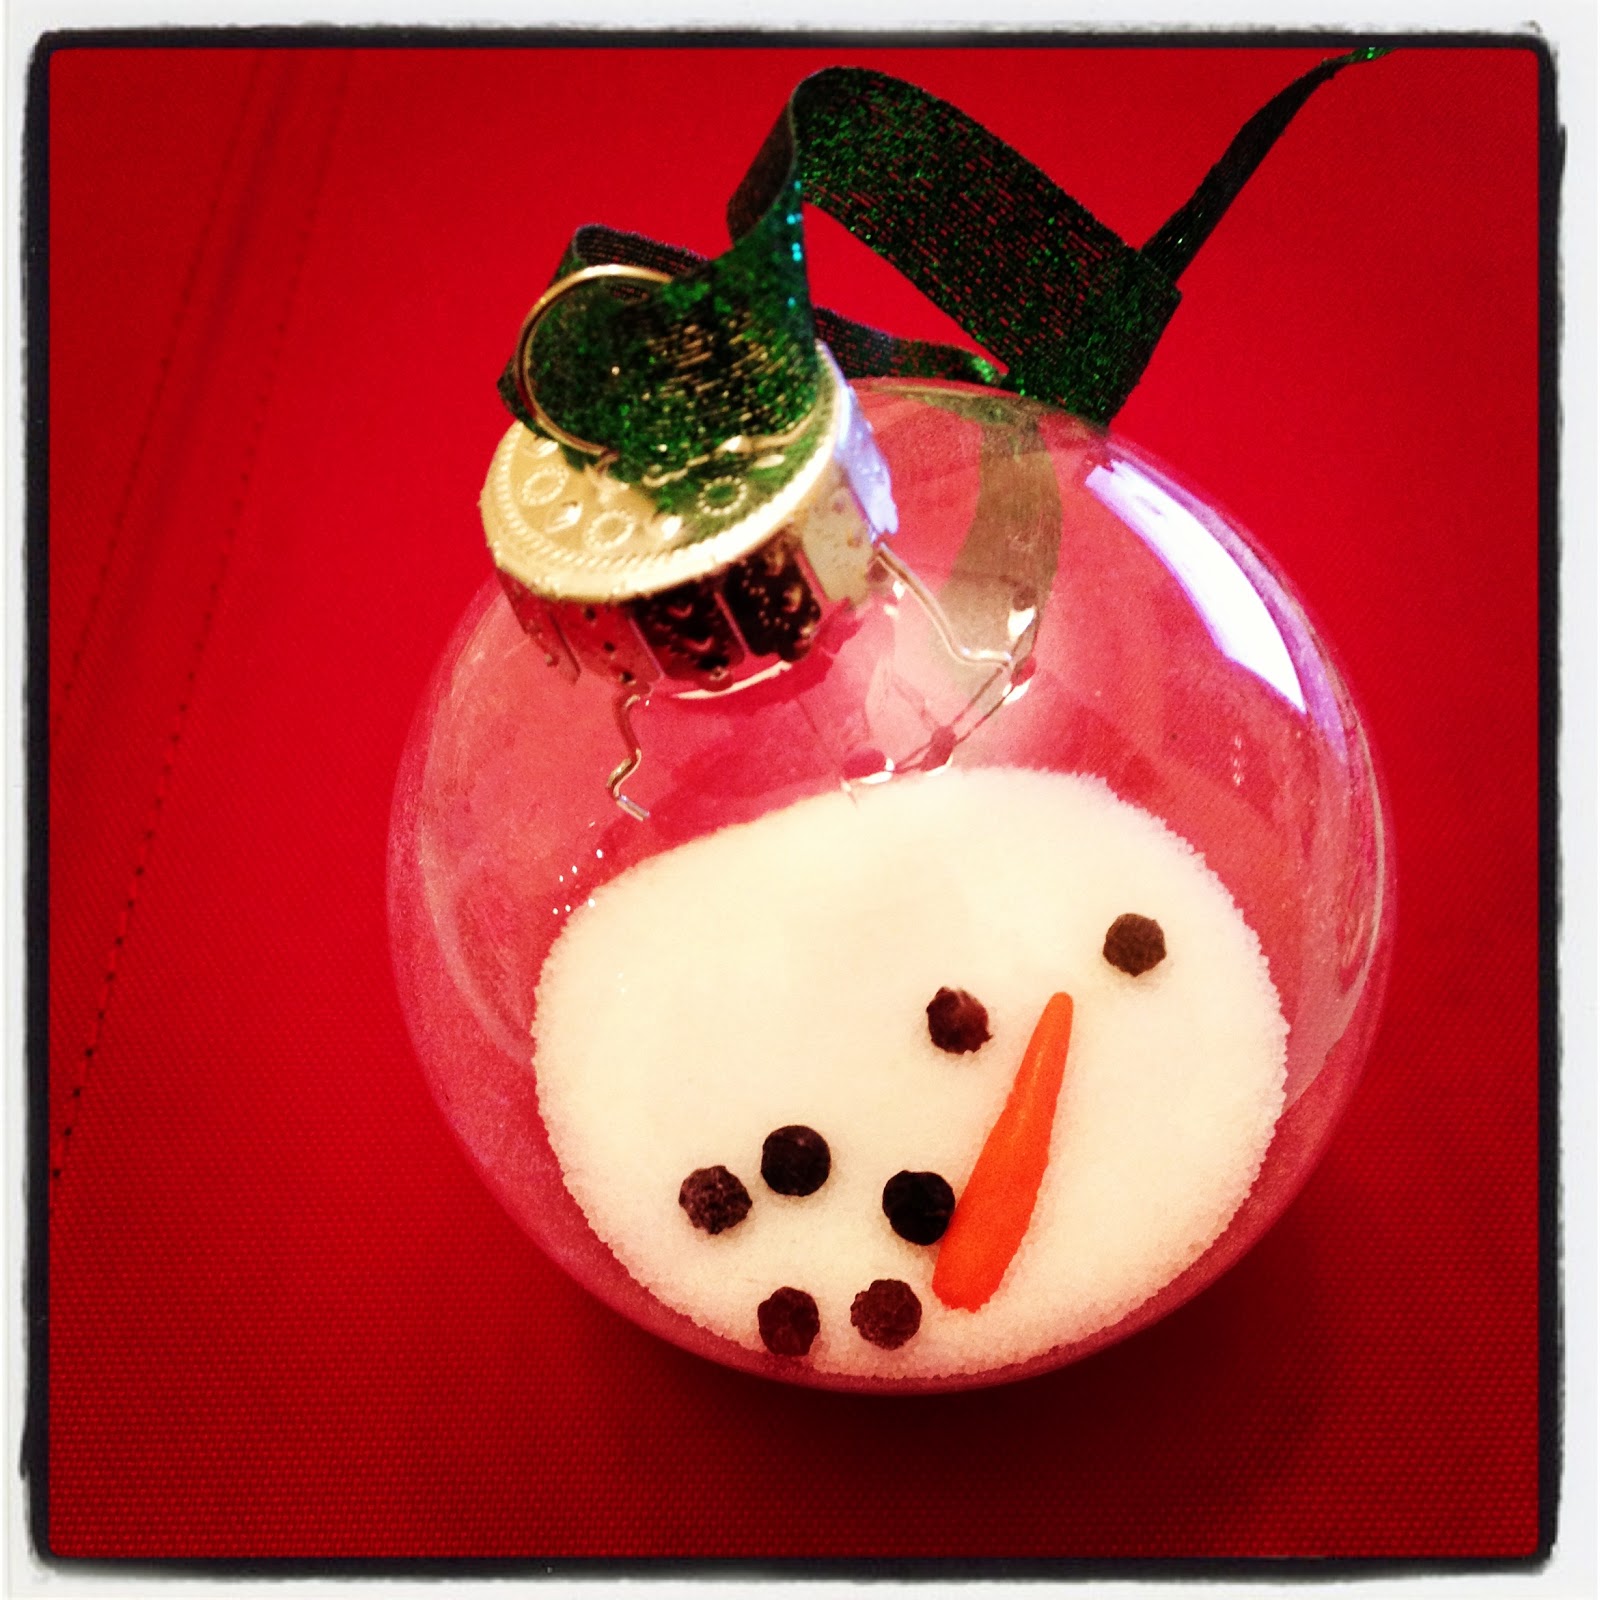 covered-in-glitter-and-glue-melted-snowman-ornament